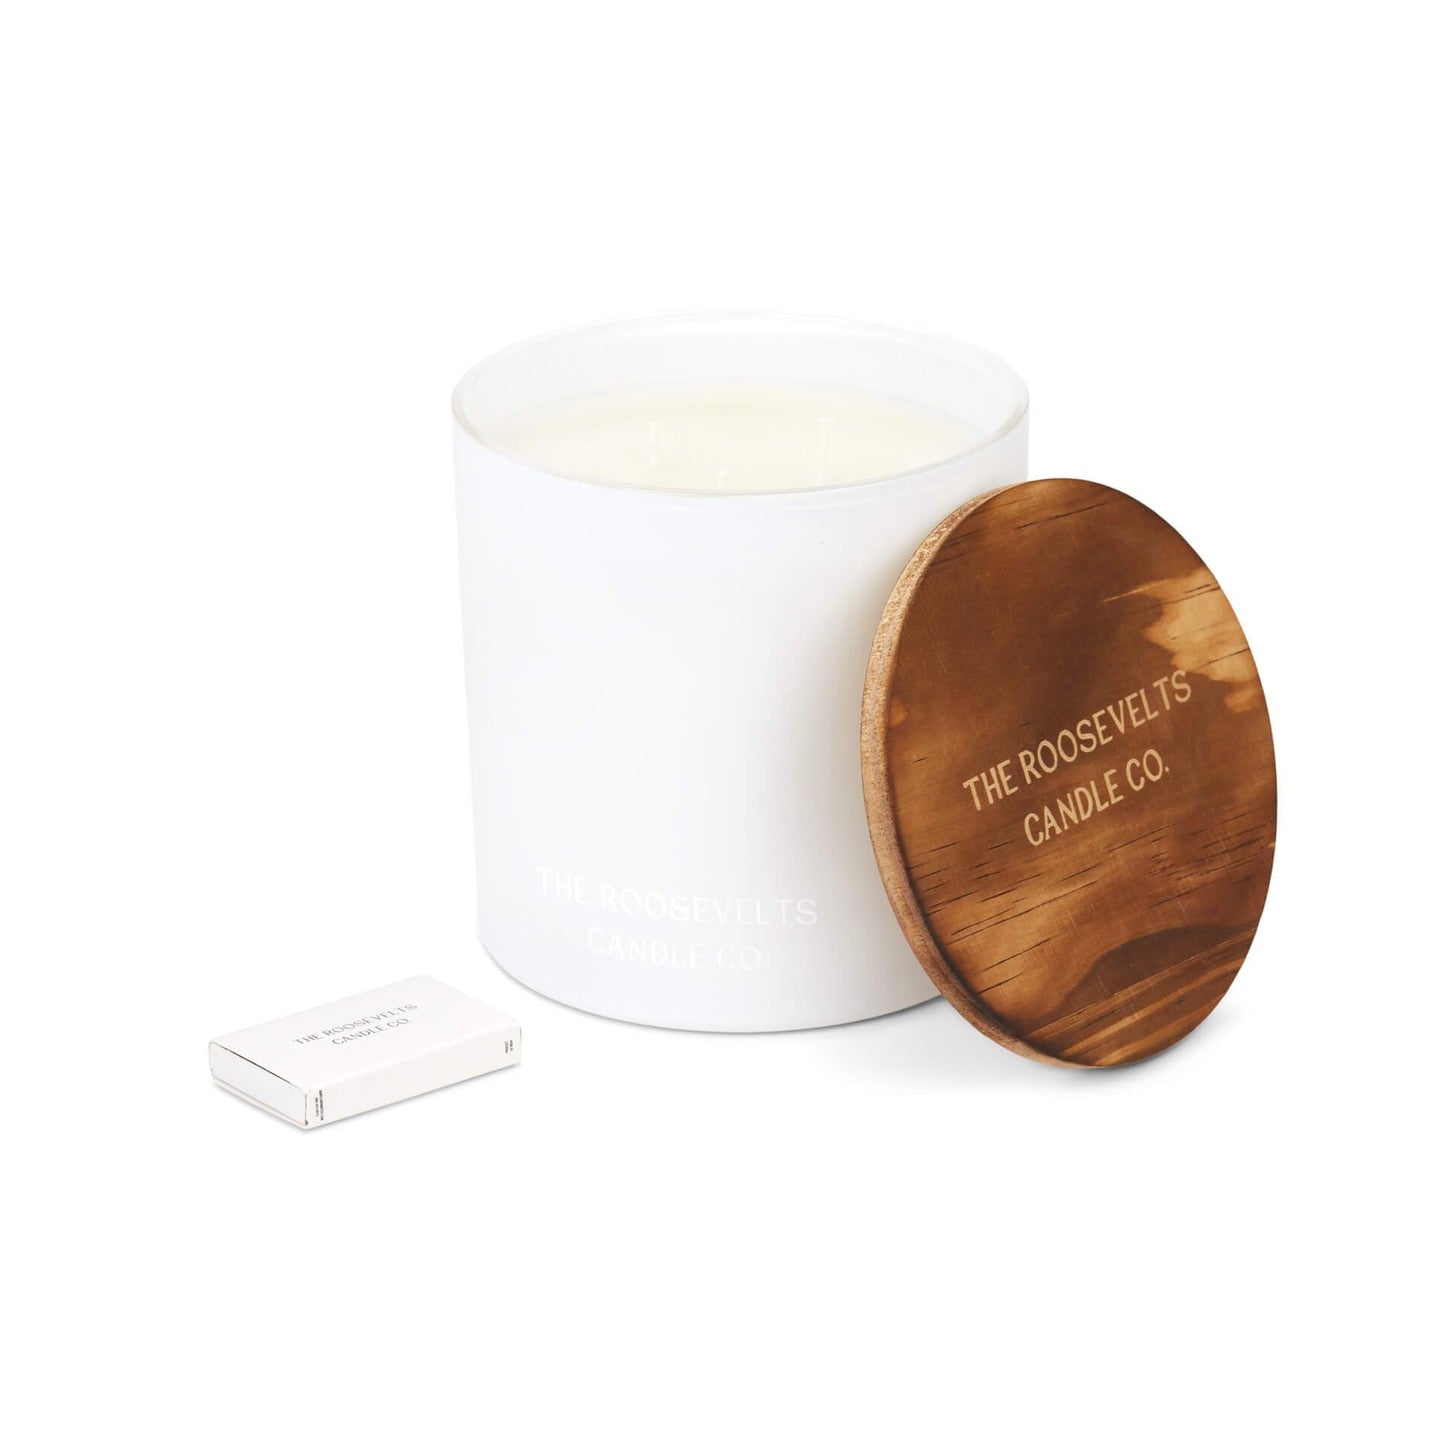 Muir Woods 3 Wick Candle - The Roosevelts Candle Co.